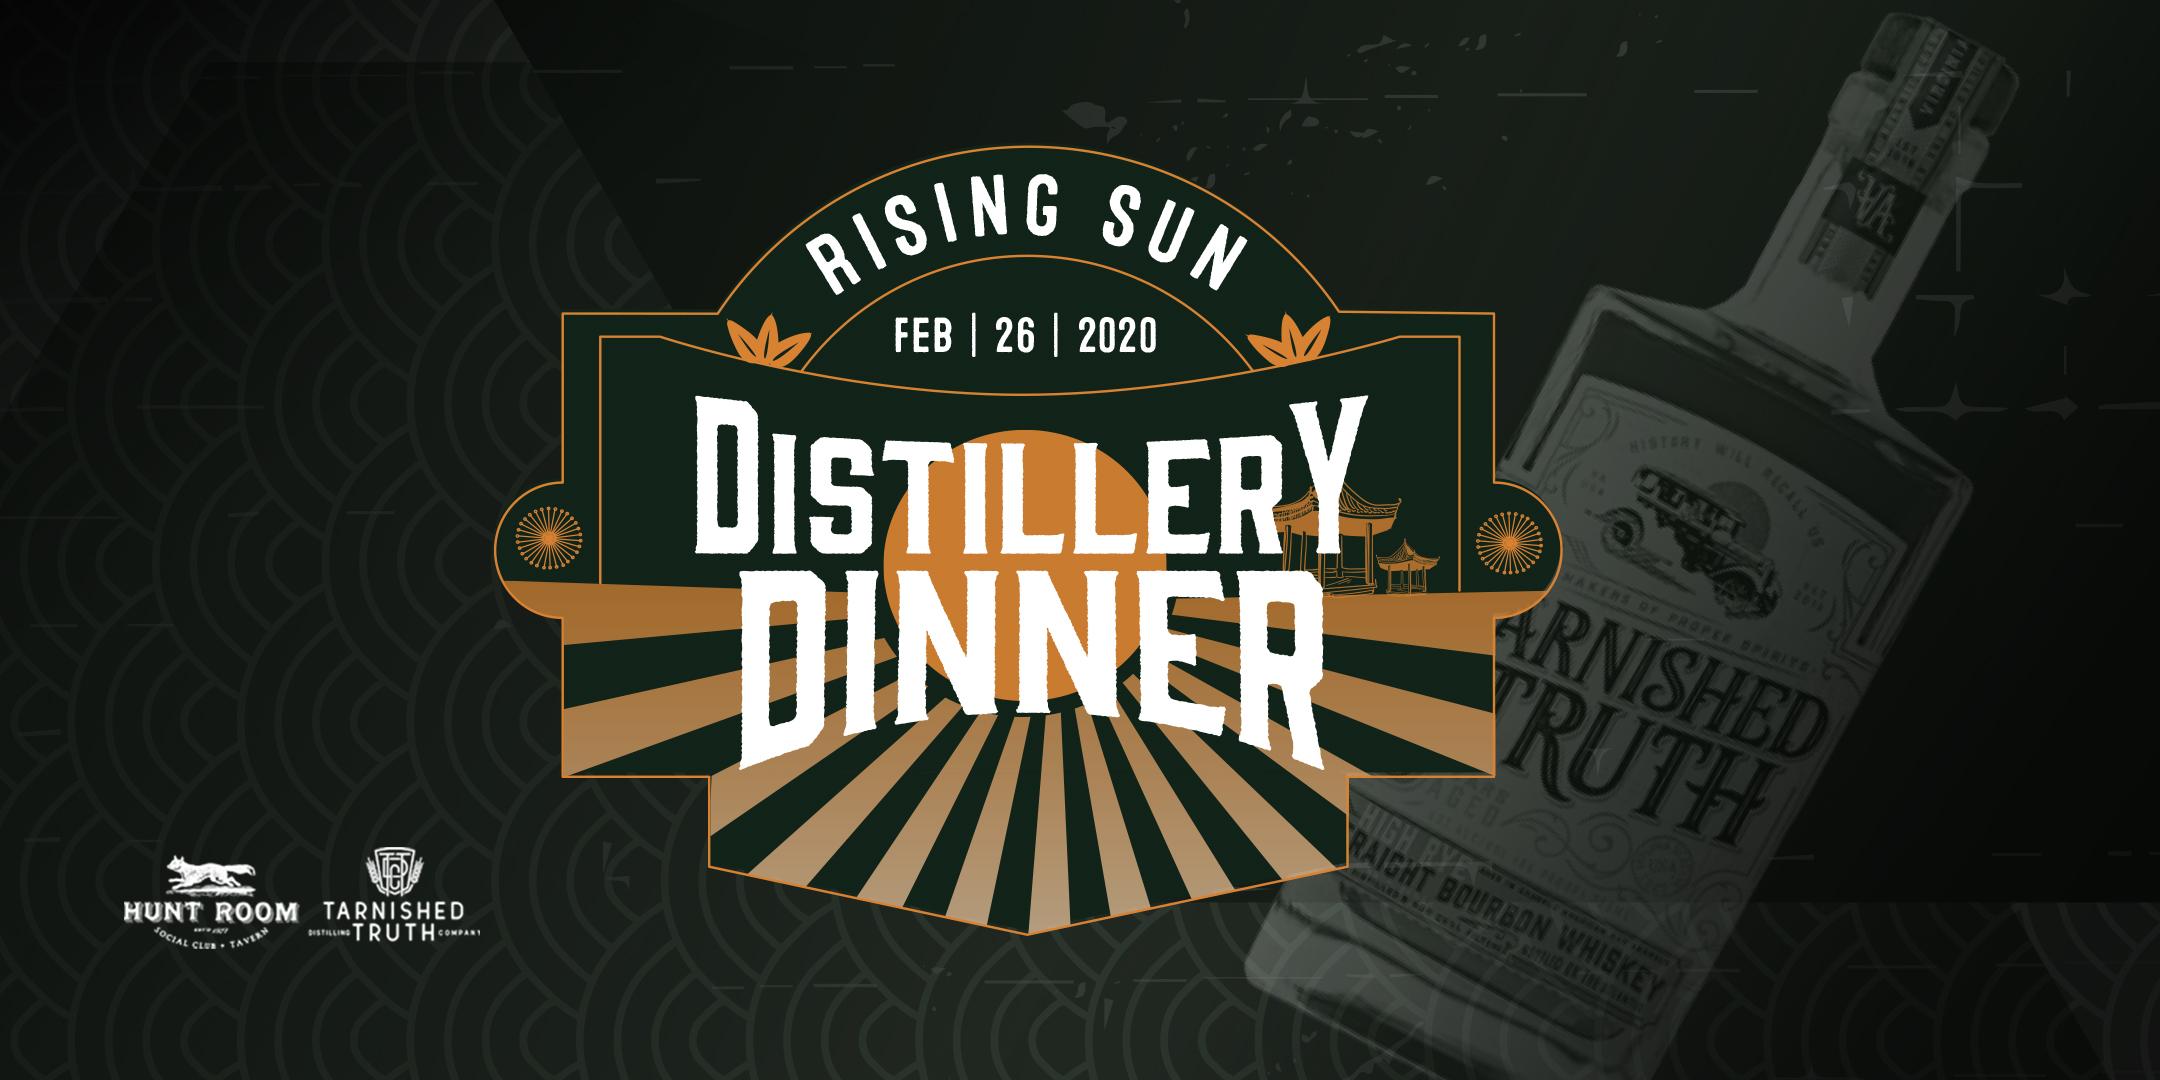 Japanese Distillery Dinner featuring Tarnished Truth Distilling Co.